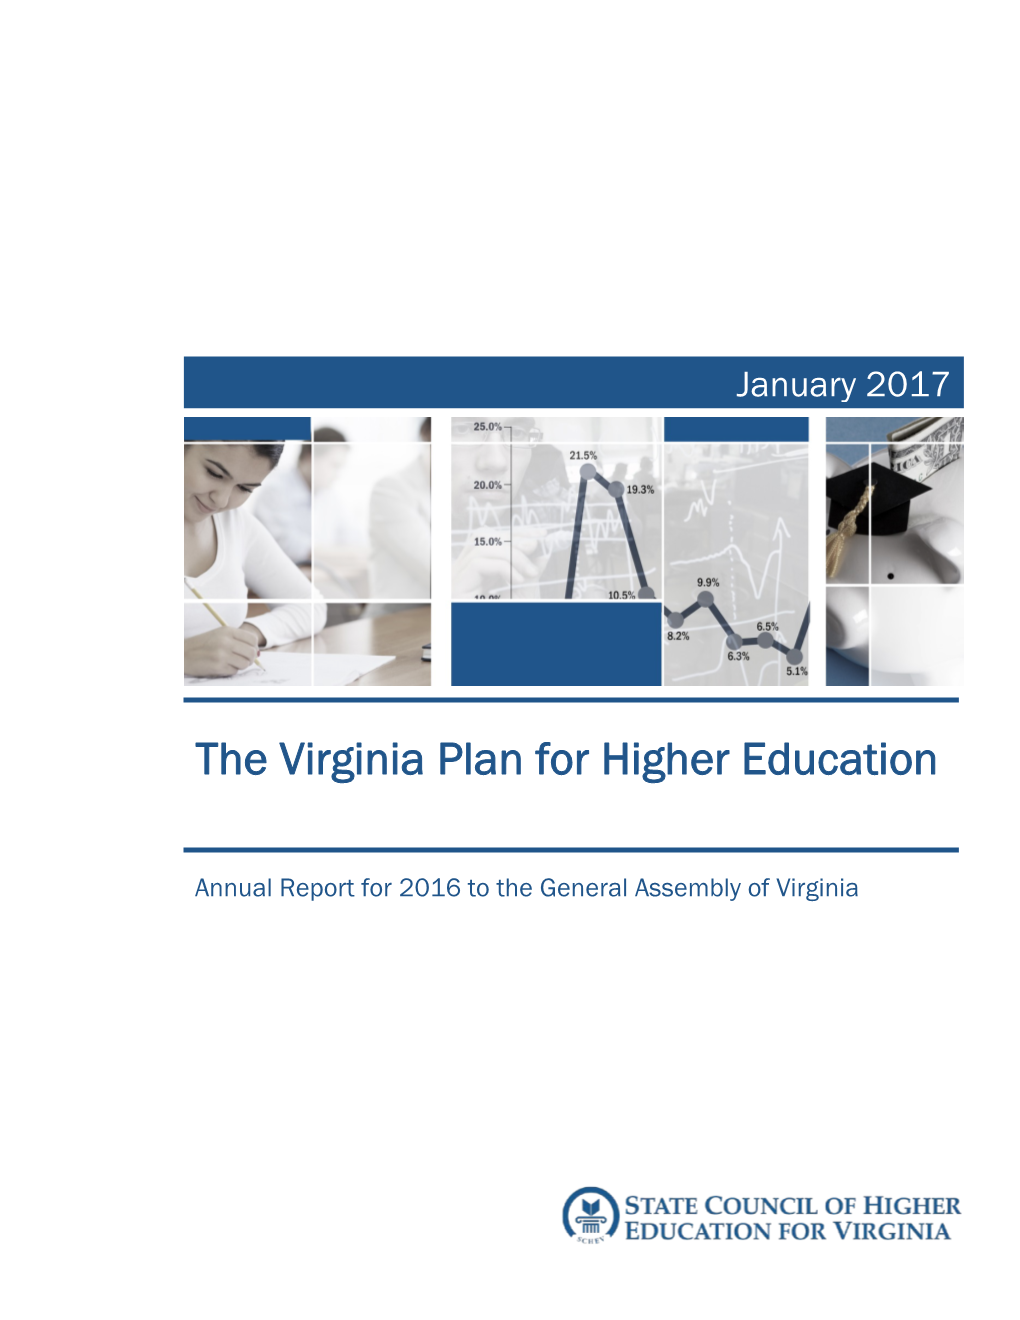 The Virginia Plan for Higher Education